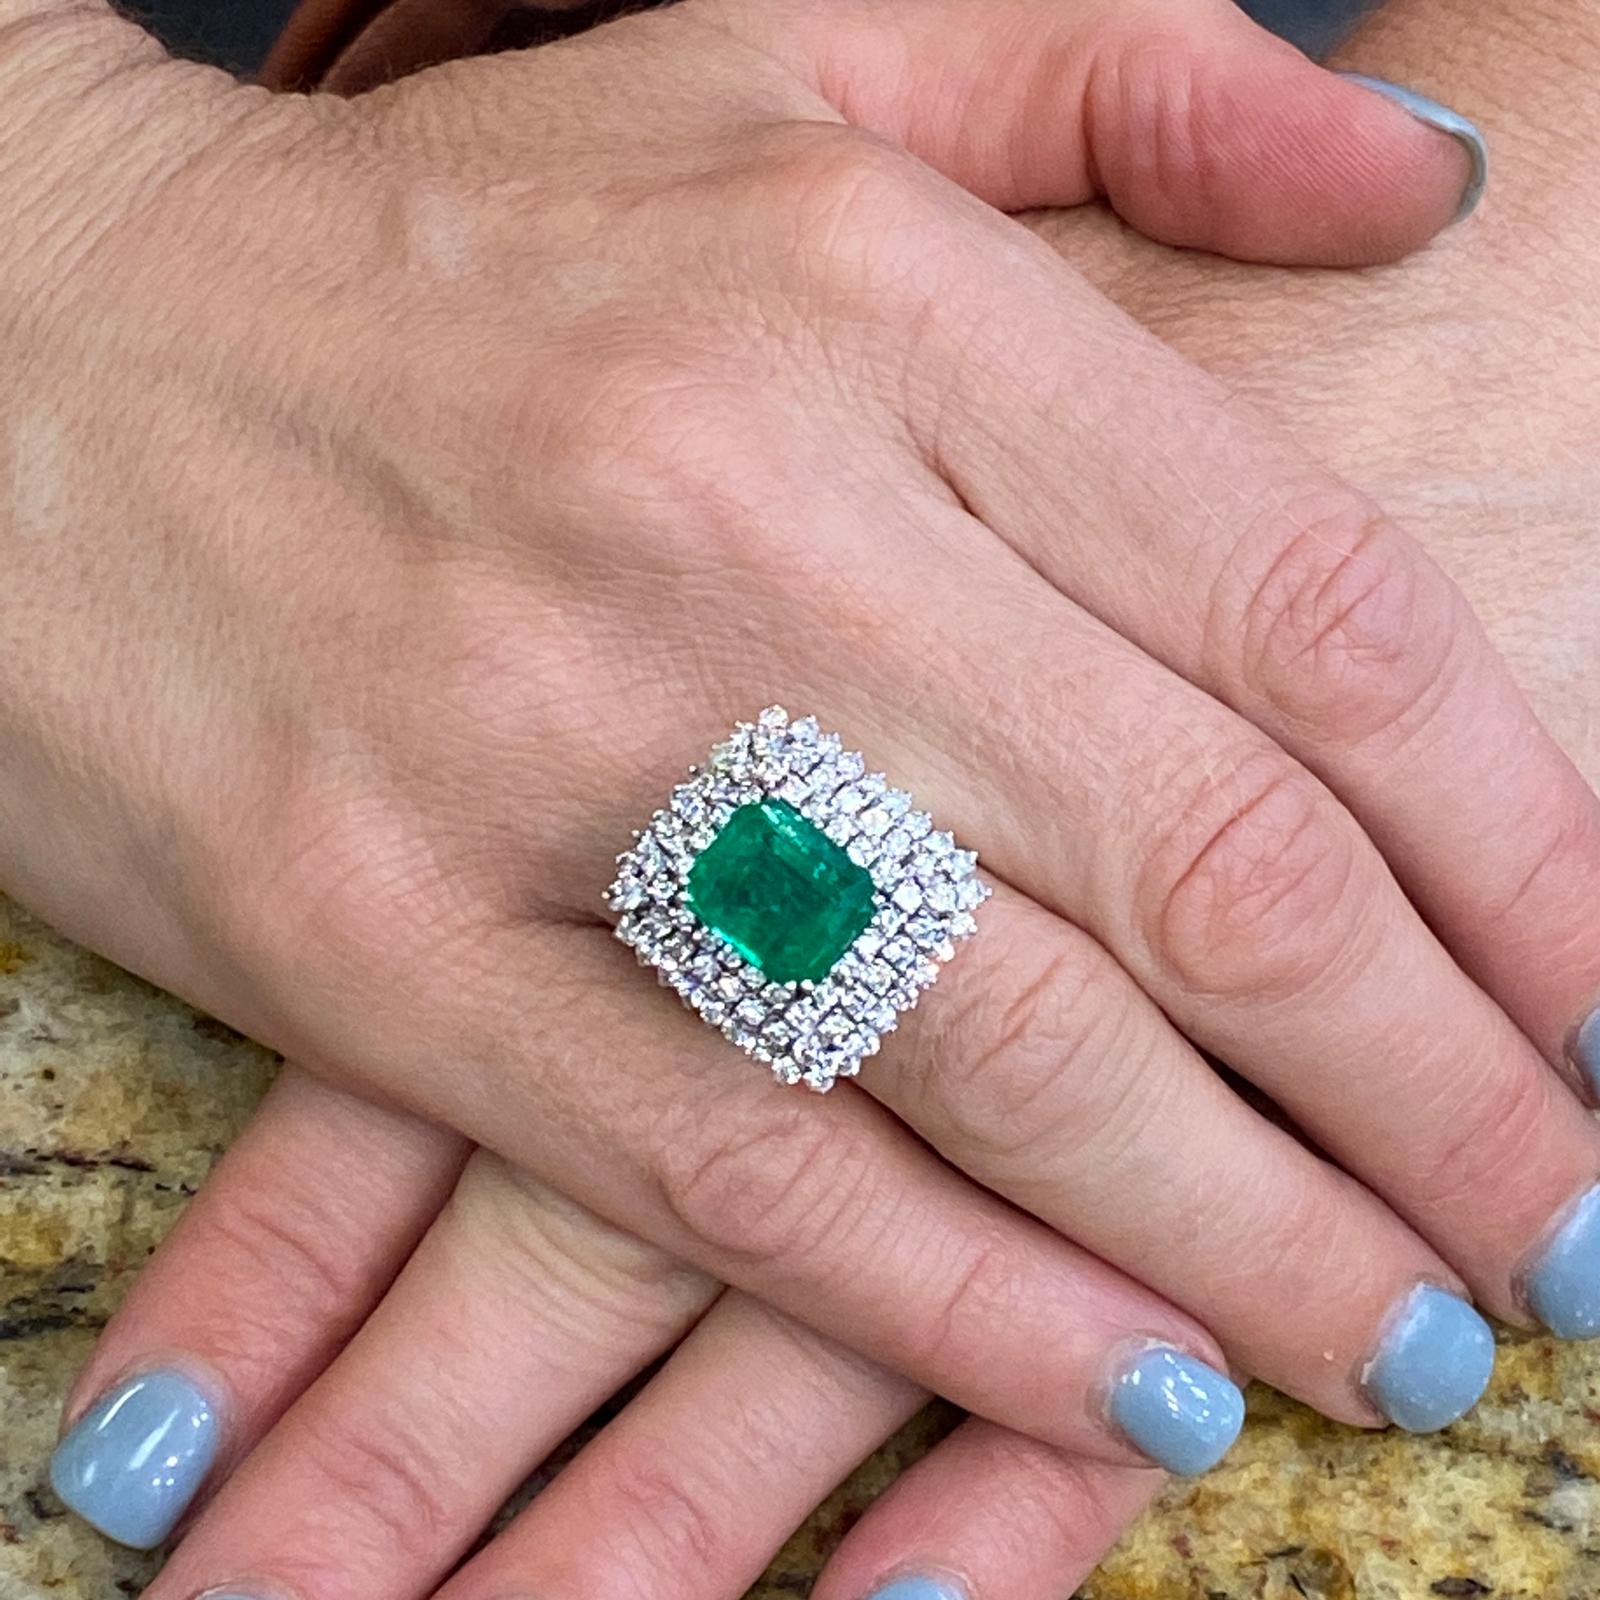 Beautiful emerald diamond cocktail ring handcrafted in platinum. The ring features a 5.59 carat bright green emerald of Afghanistan origin with minor treatment and certified by the AGL. The 89 round brilliant cut diamonds weigh 2.00 carat total